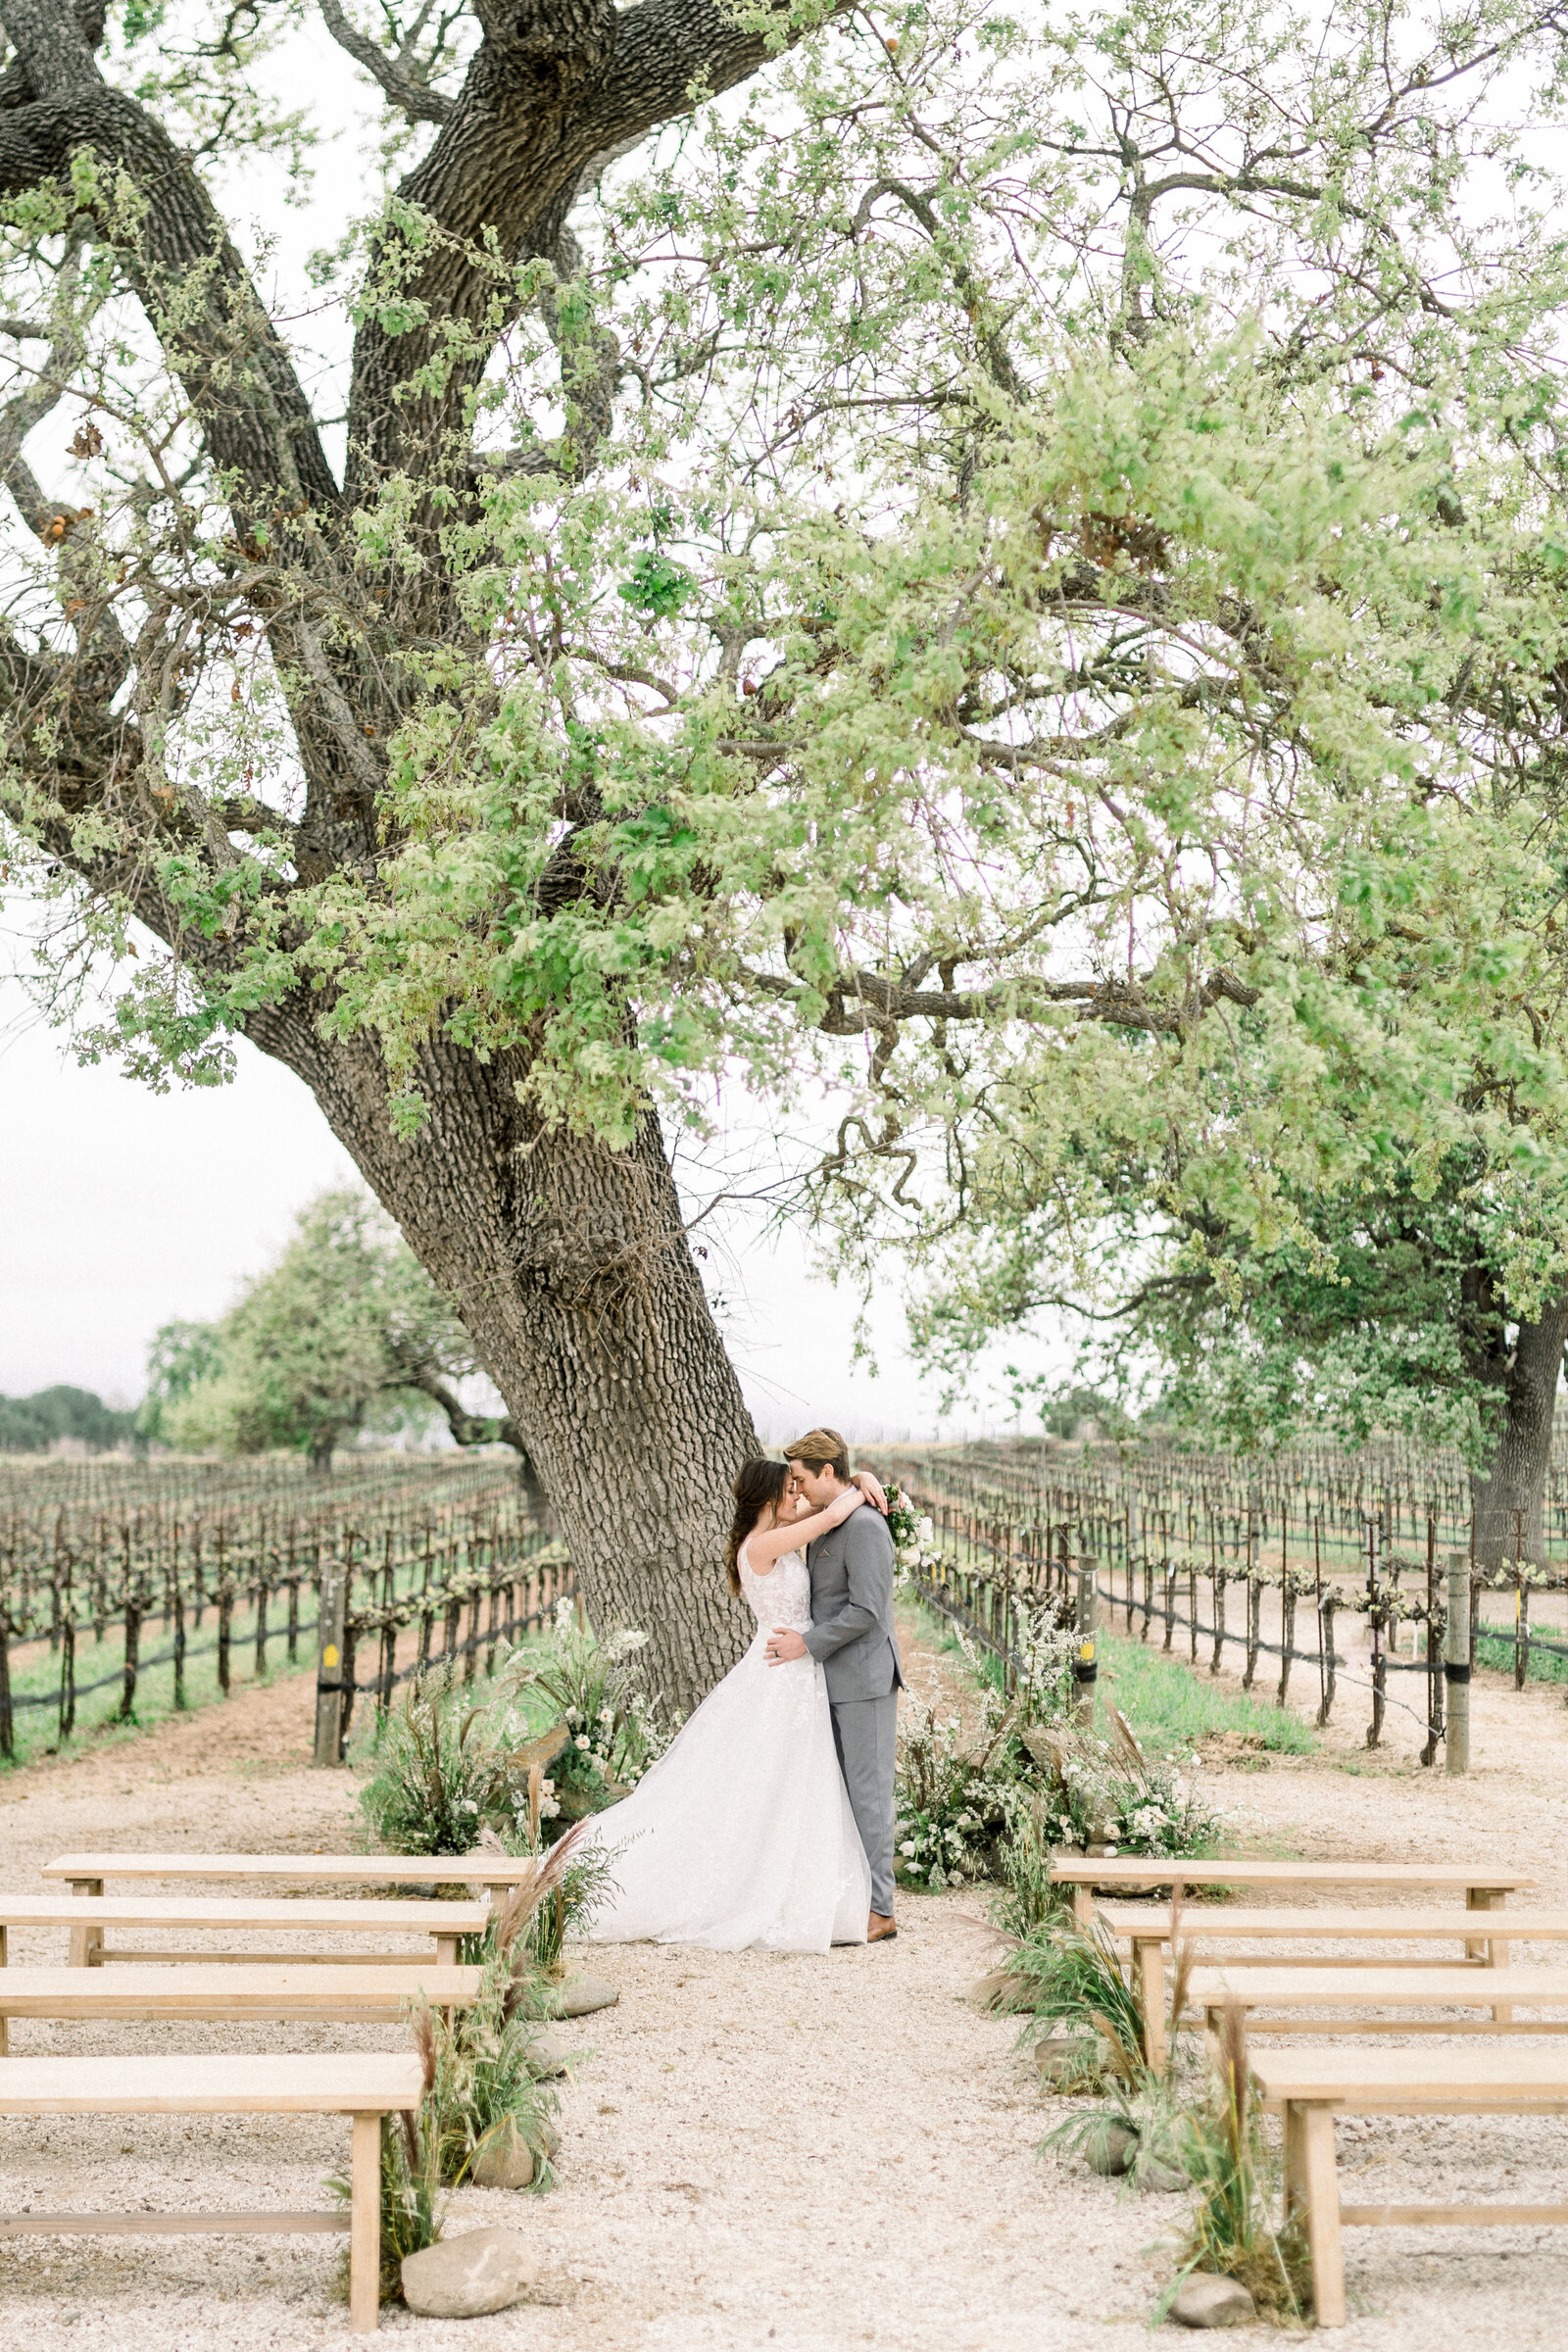 Couple at the alter under the oak tree at their Sunstone Winery wedding in Santa Ynez, CA